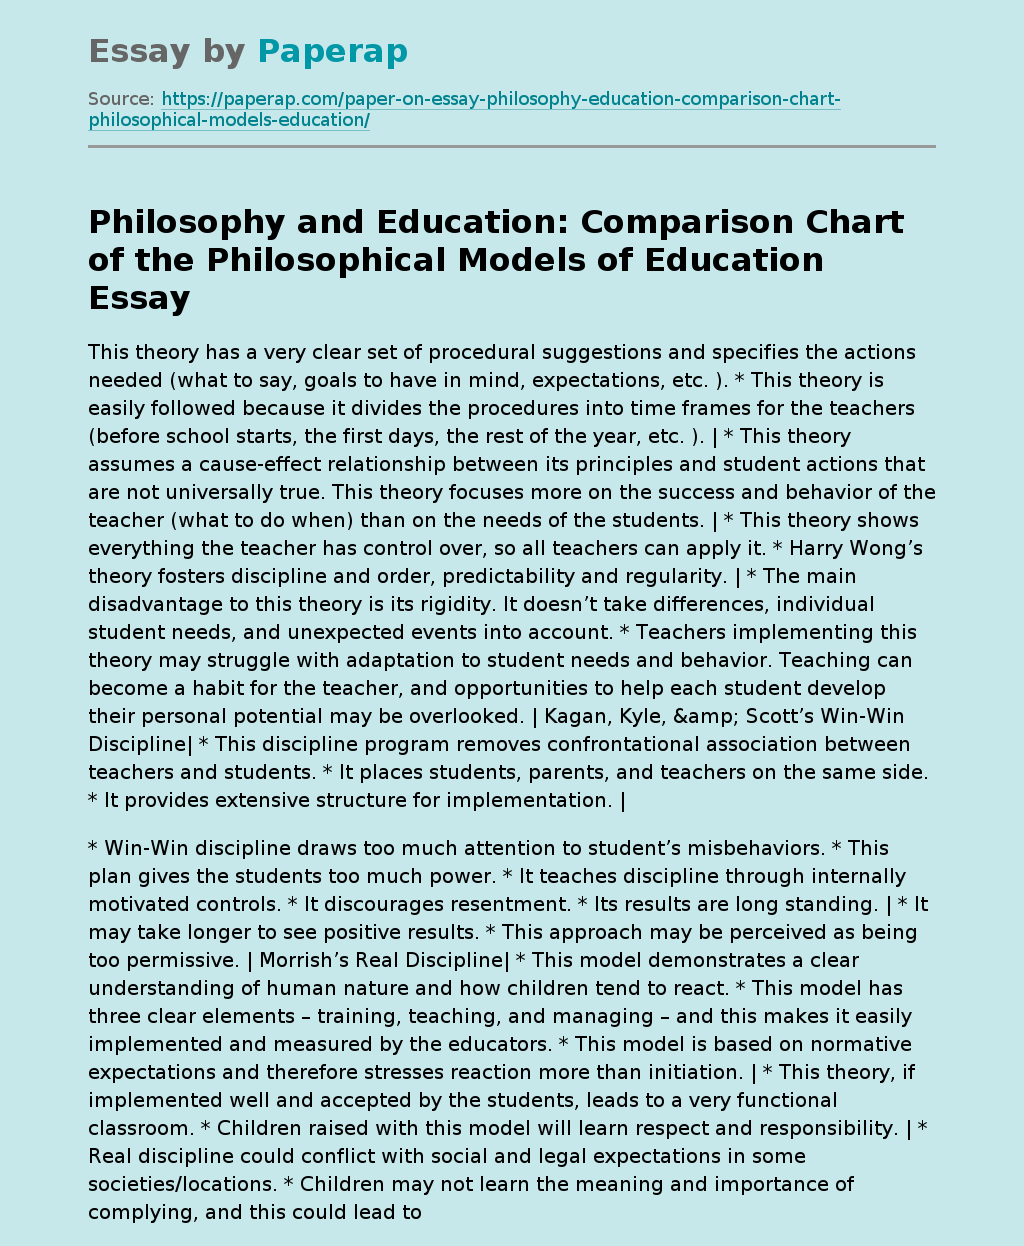 Philosophy and Education: Comparison Chart of the Philosophical Models of Education